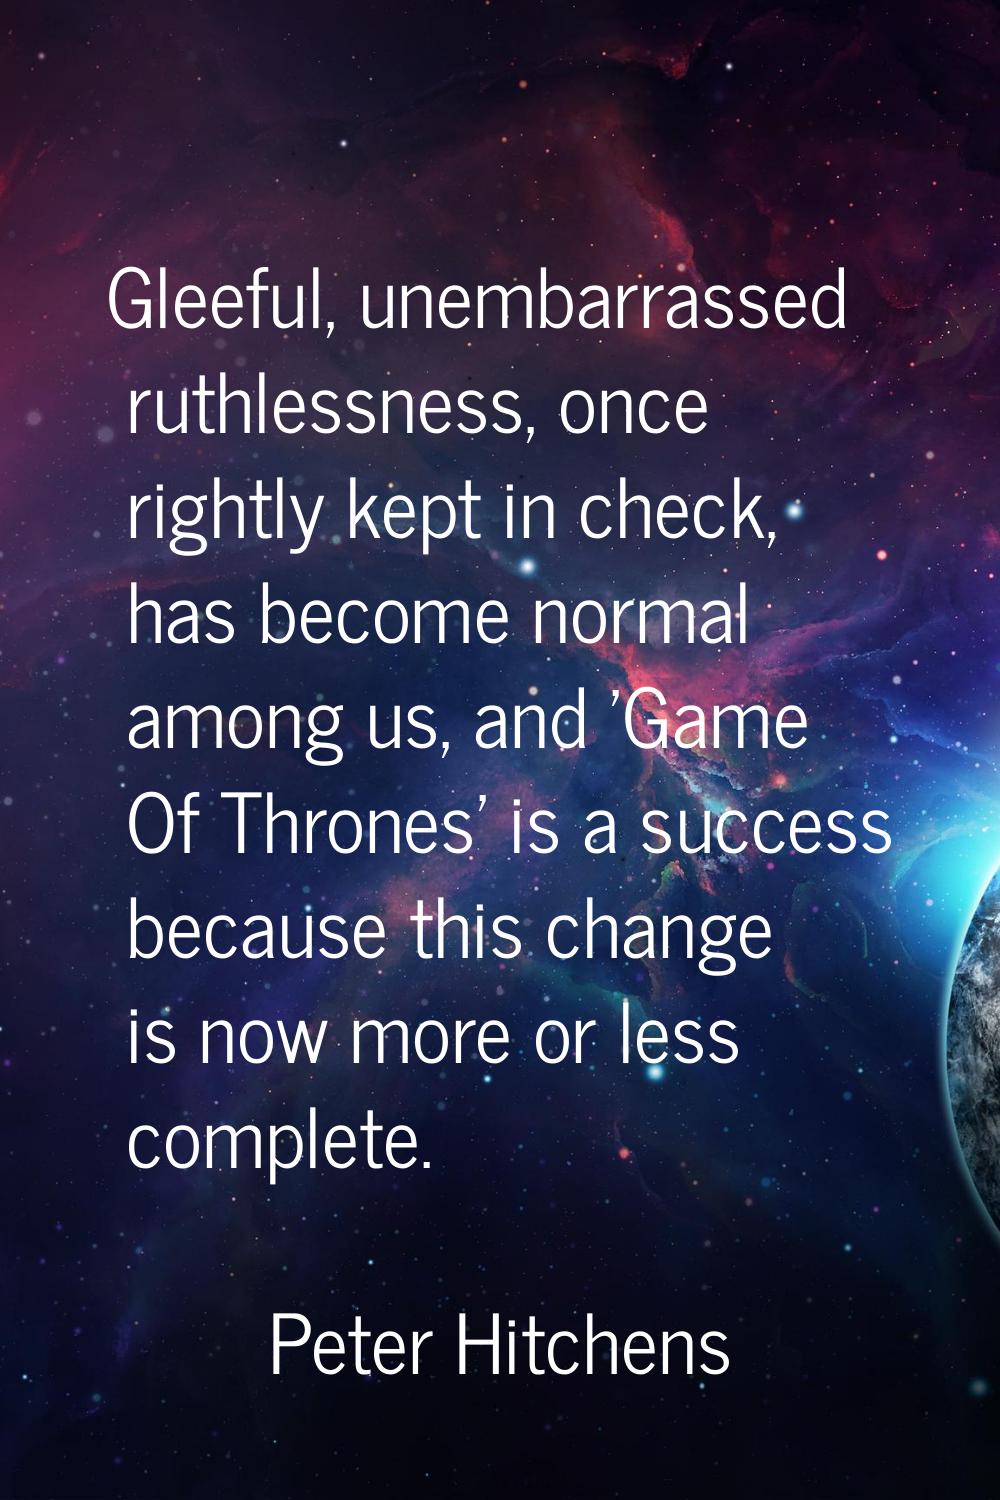 Gleeful, unembarrassed ruthlessness, once rightly kept in check, has become normal among us, and 'G